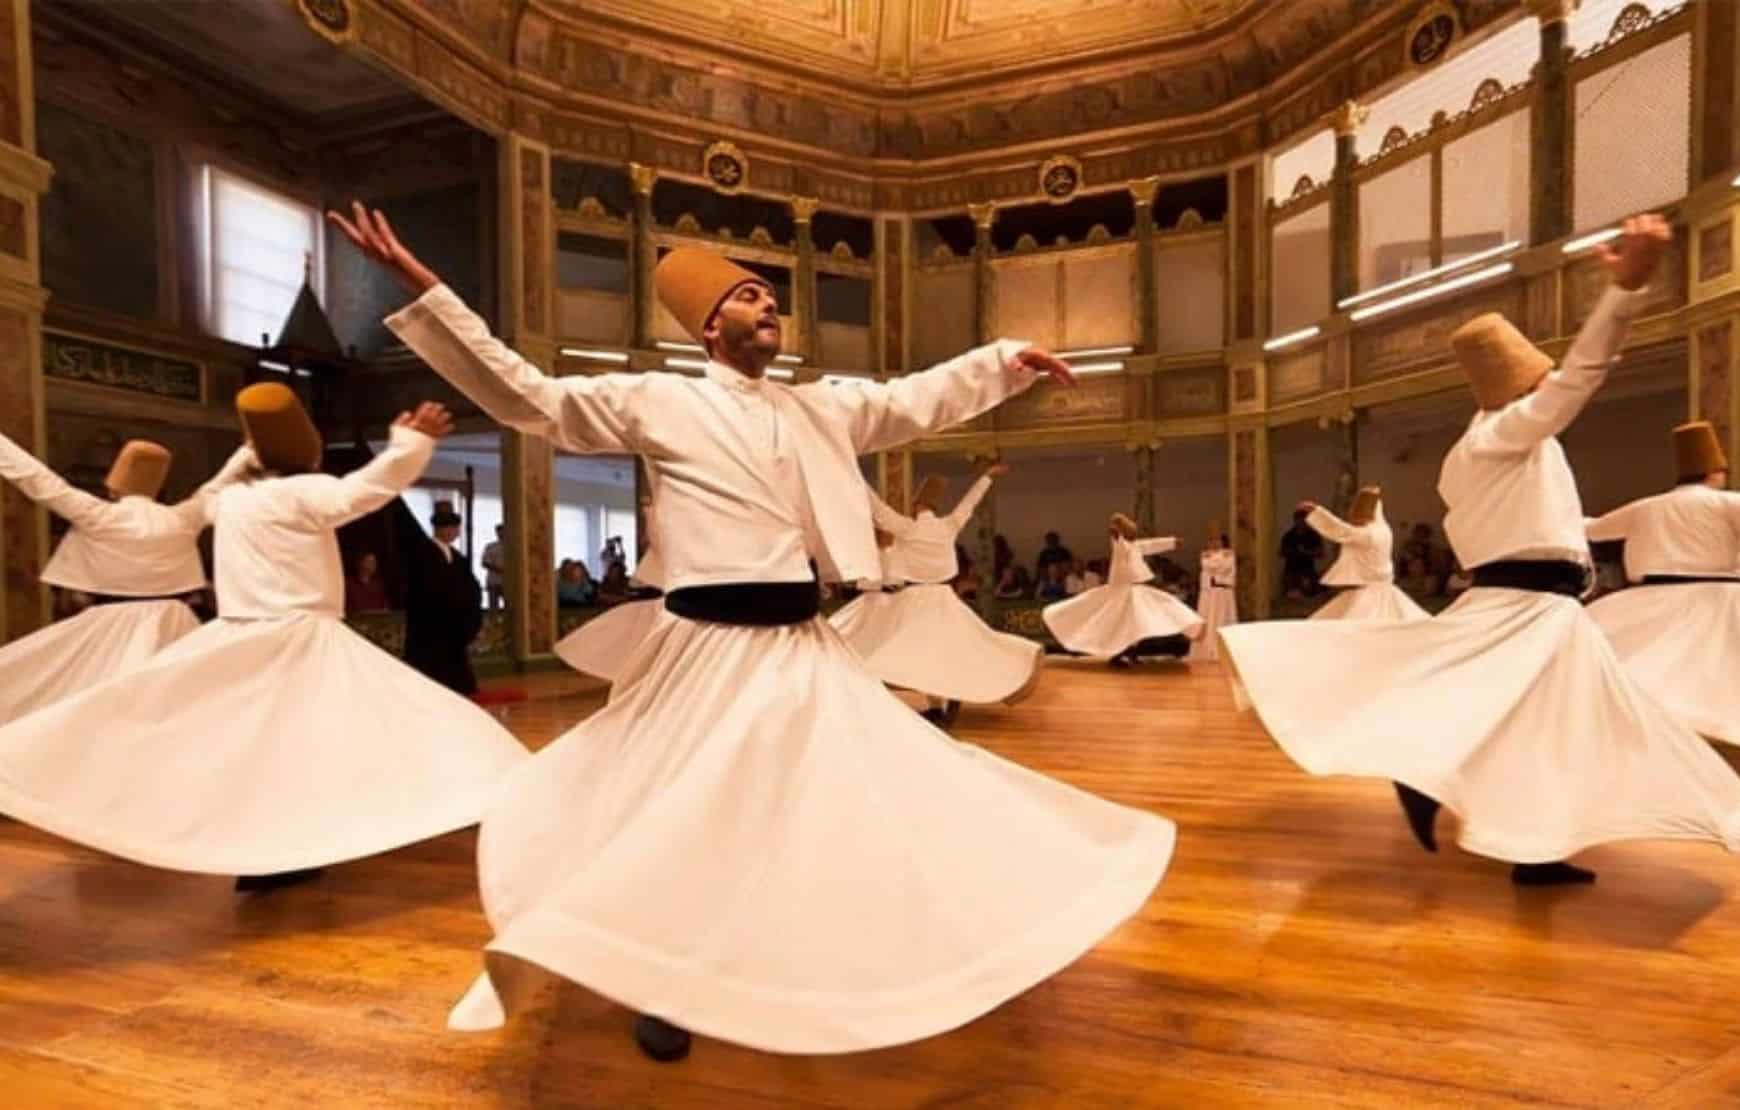 Dervish ceremony in cappadocia - whirling dervishes in a hall